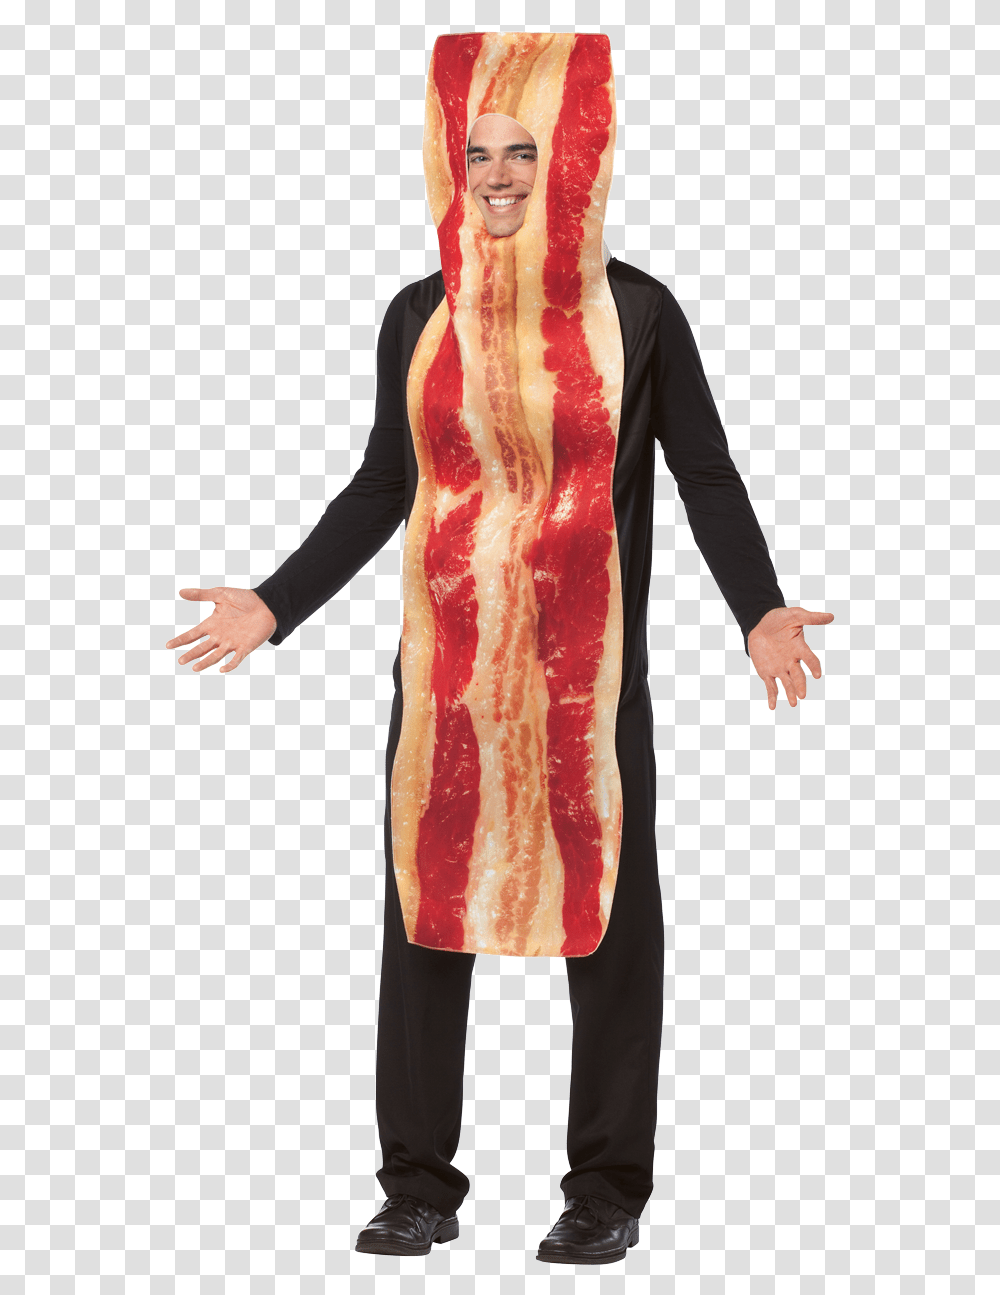 Dress Up Starting With B, Pork, Food, Bacon, Person Transparent Png